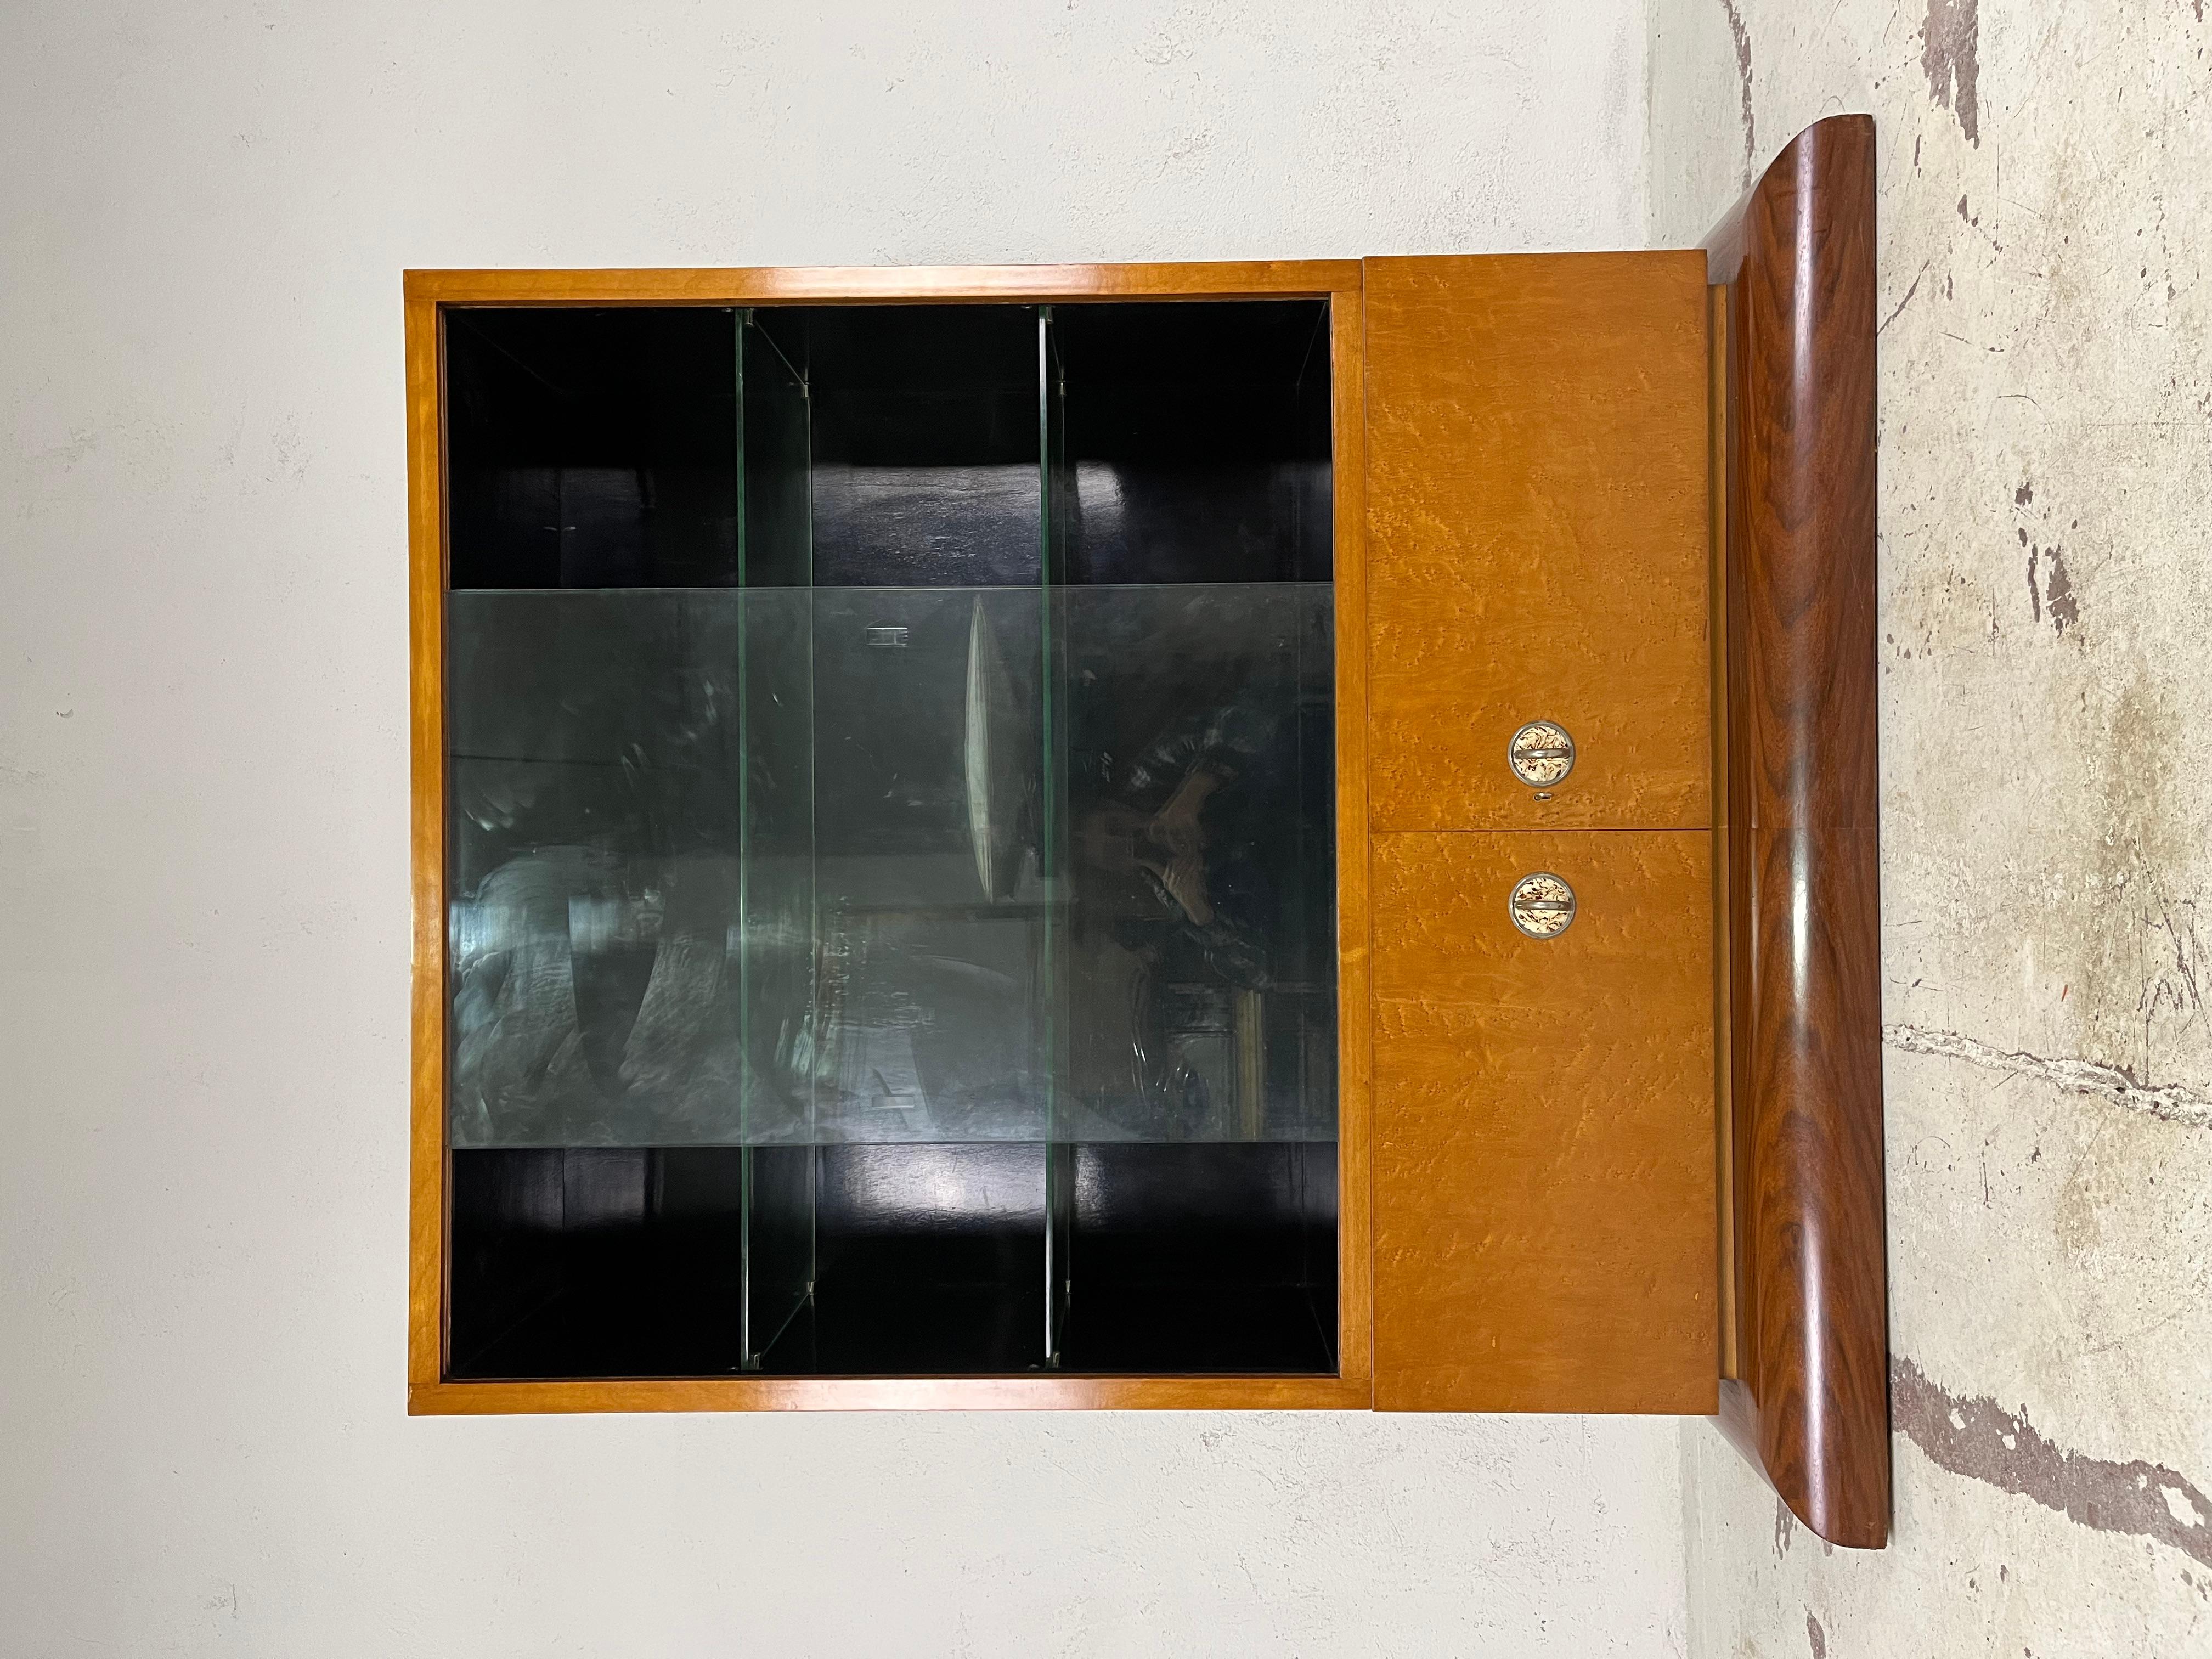 Beautiful deco display case in briar and wood, with double shelf and double glass doors of Italian manufacture from the 1960s.

The display case has been thoroughly cleaned and polished and is in excellent overall condition, with a few marks that do